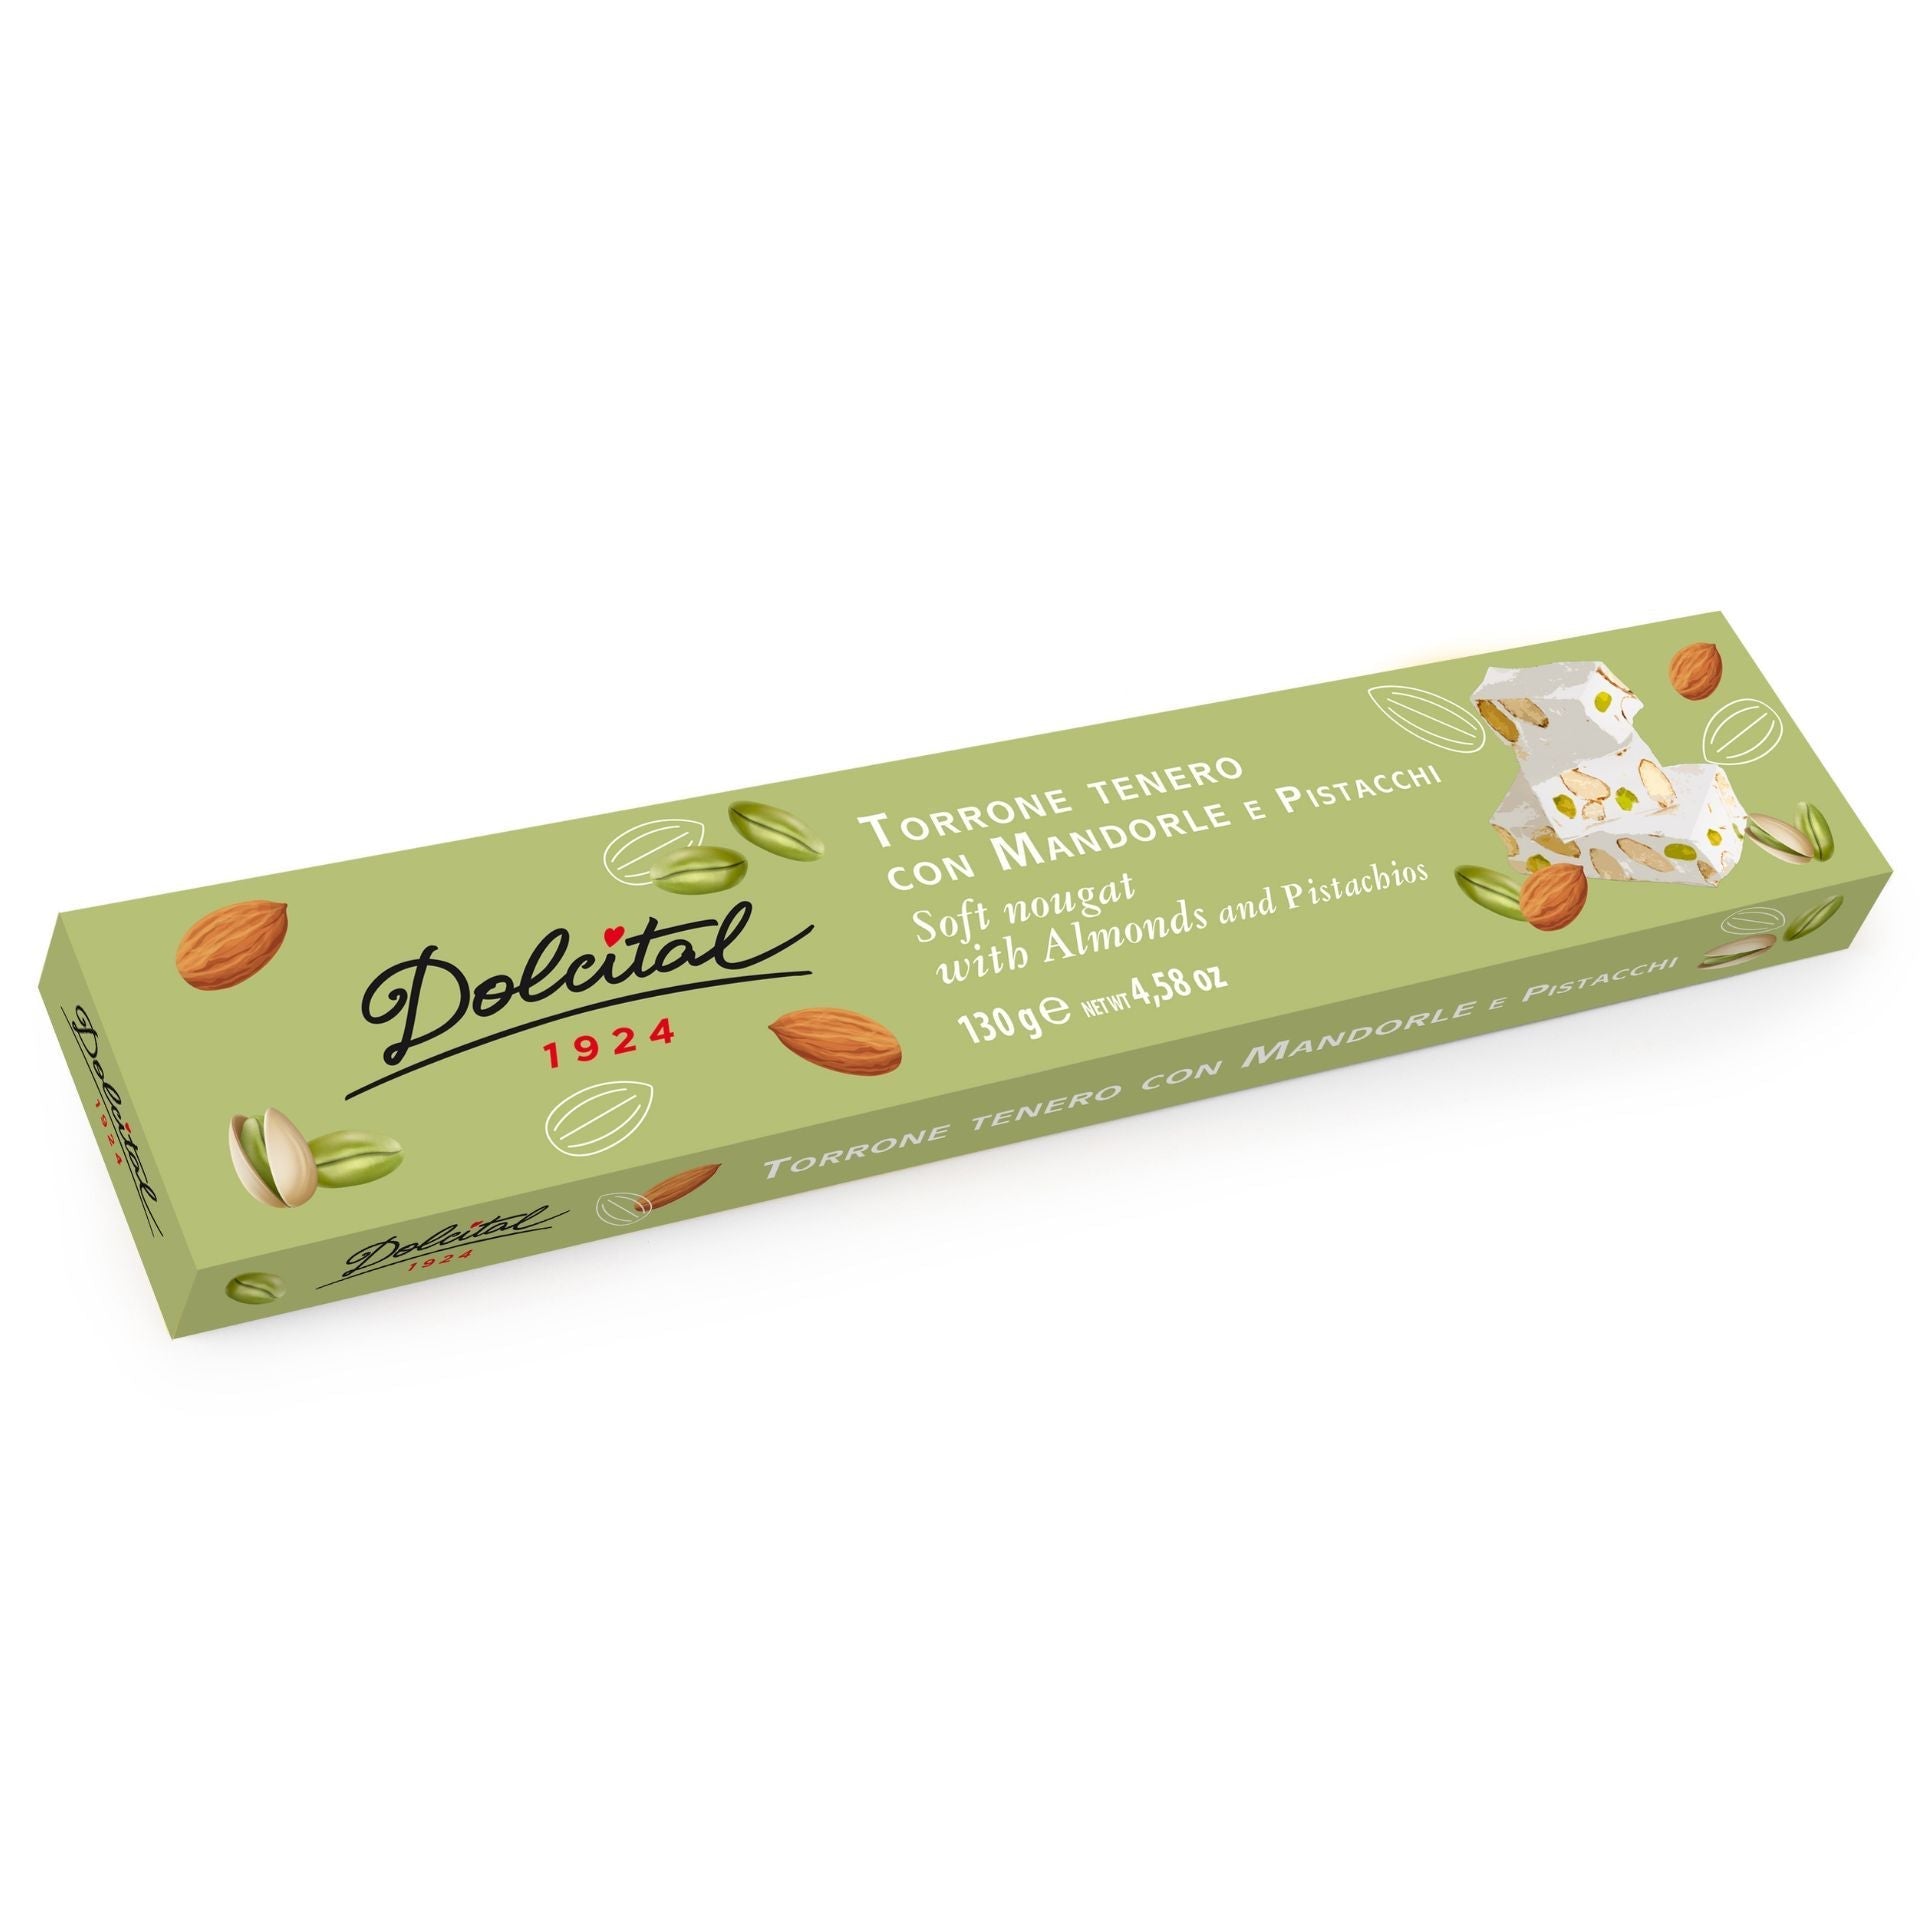 Dolcital Almond & Pistachio Soft Nougat 130g (Box)  | Imported and distributed in the UK by Just Gourmet Foods